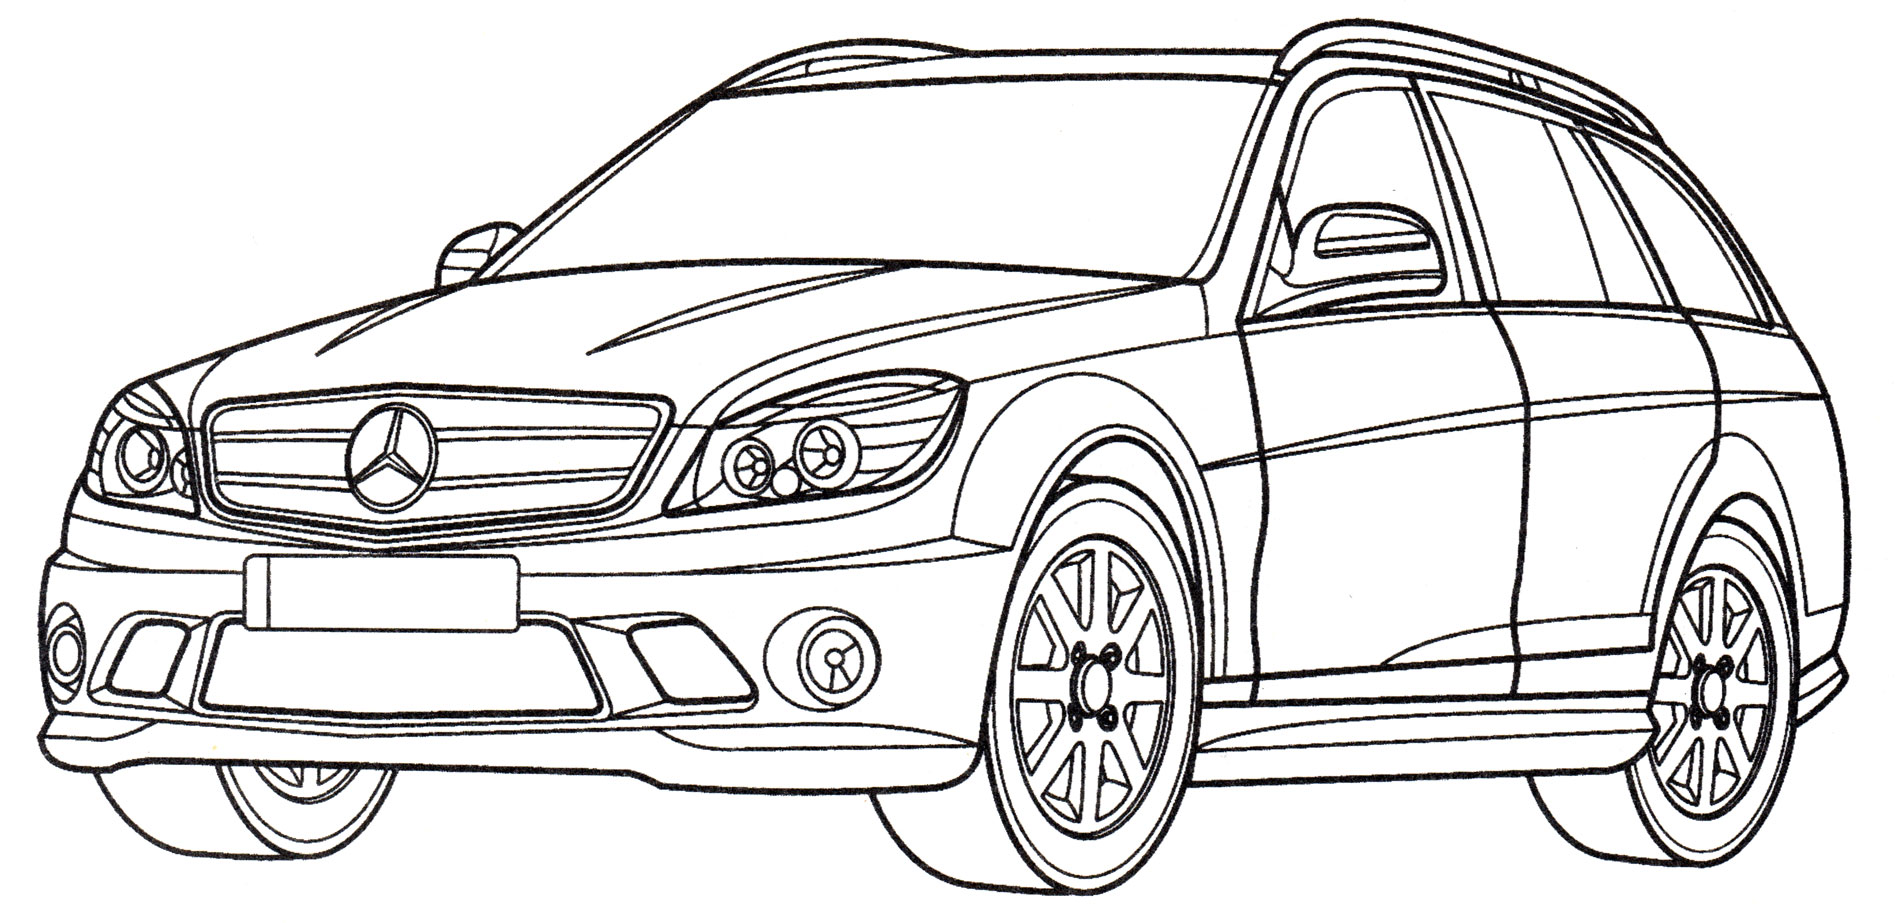 Mercedes Amg Mercedes Models Cars Coloring Pages Coloring Sheets My